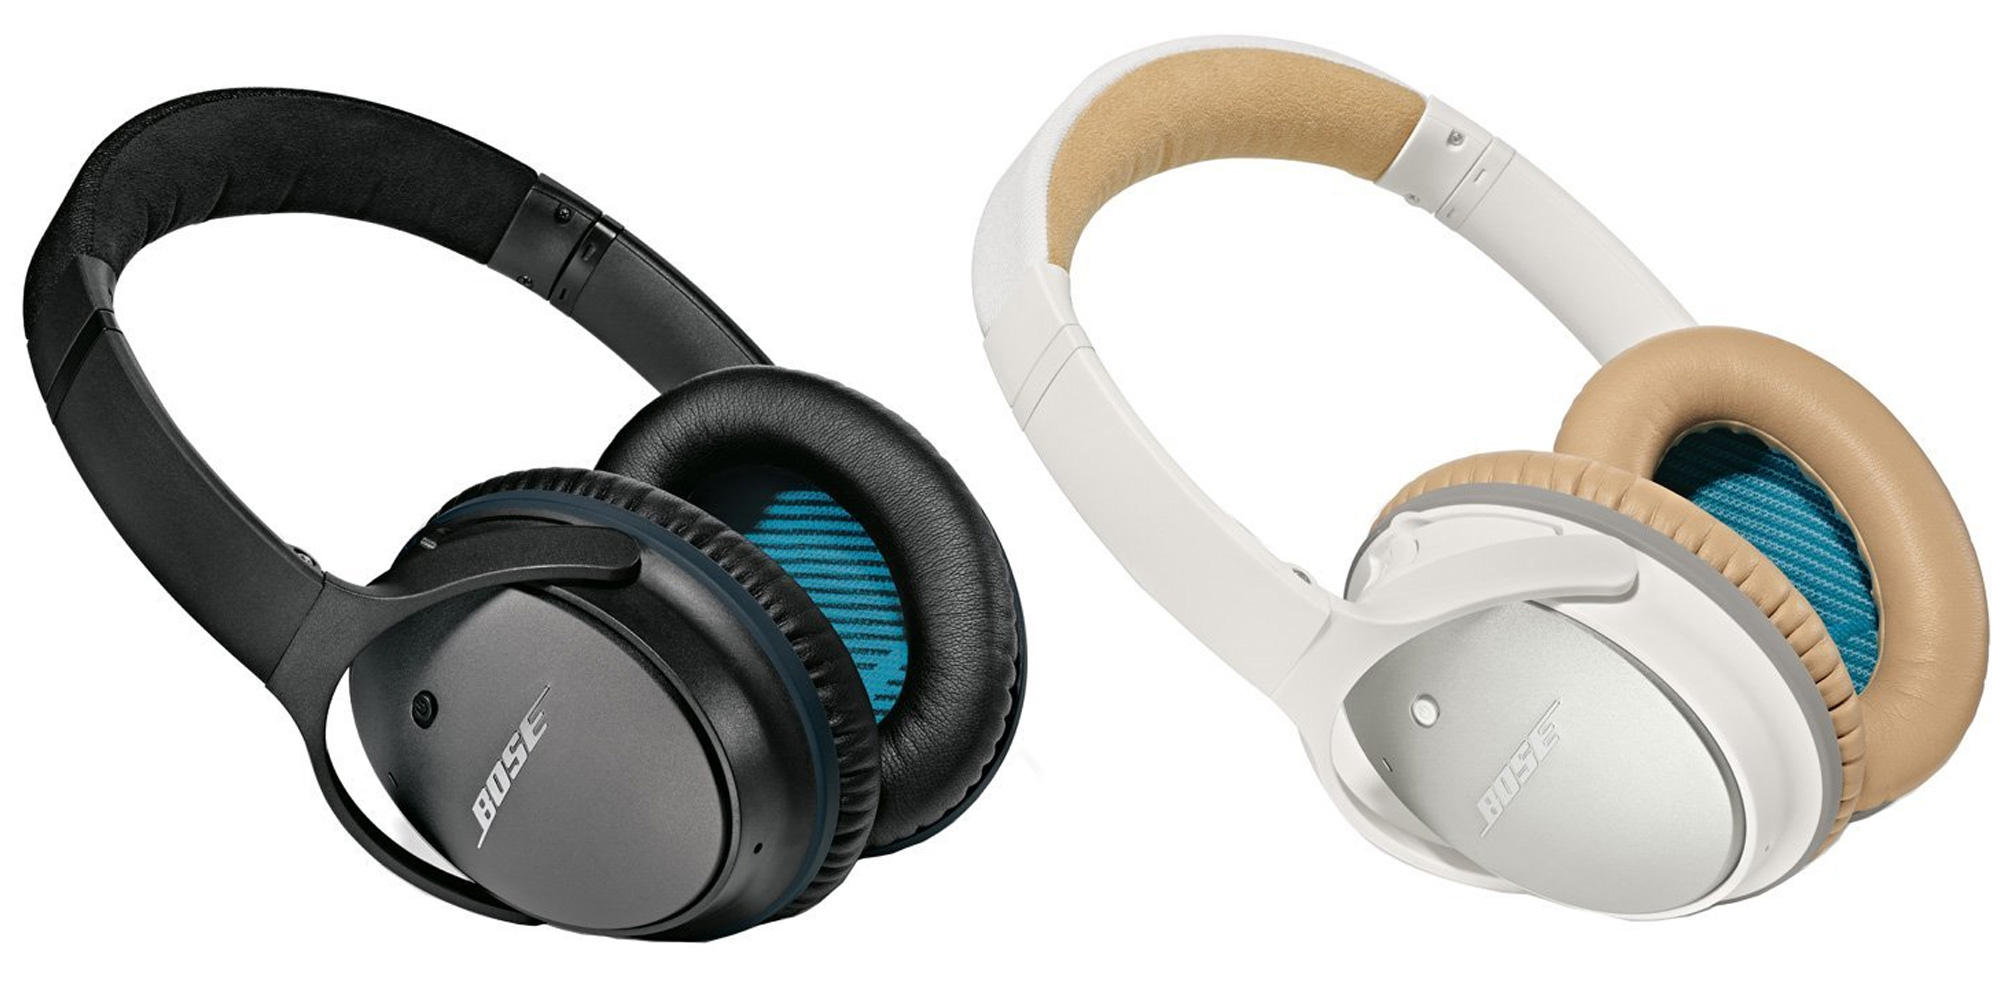 Bose QC25 acoustic noise cancelling headphones for iOS devices now $175